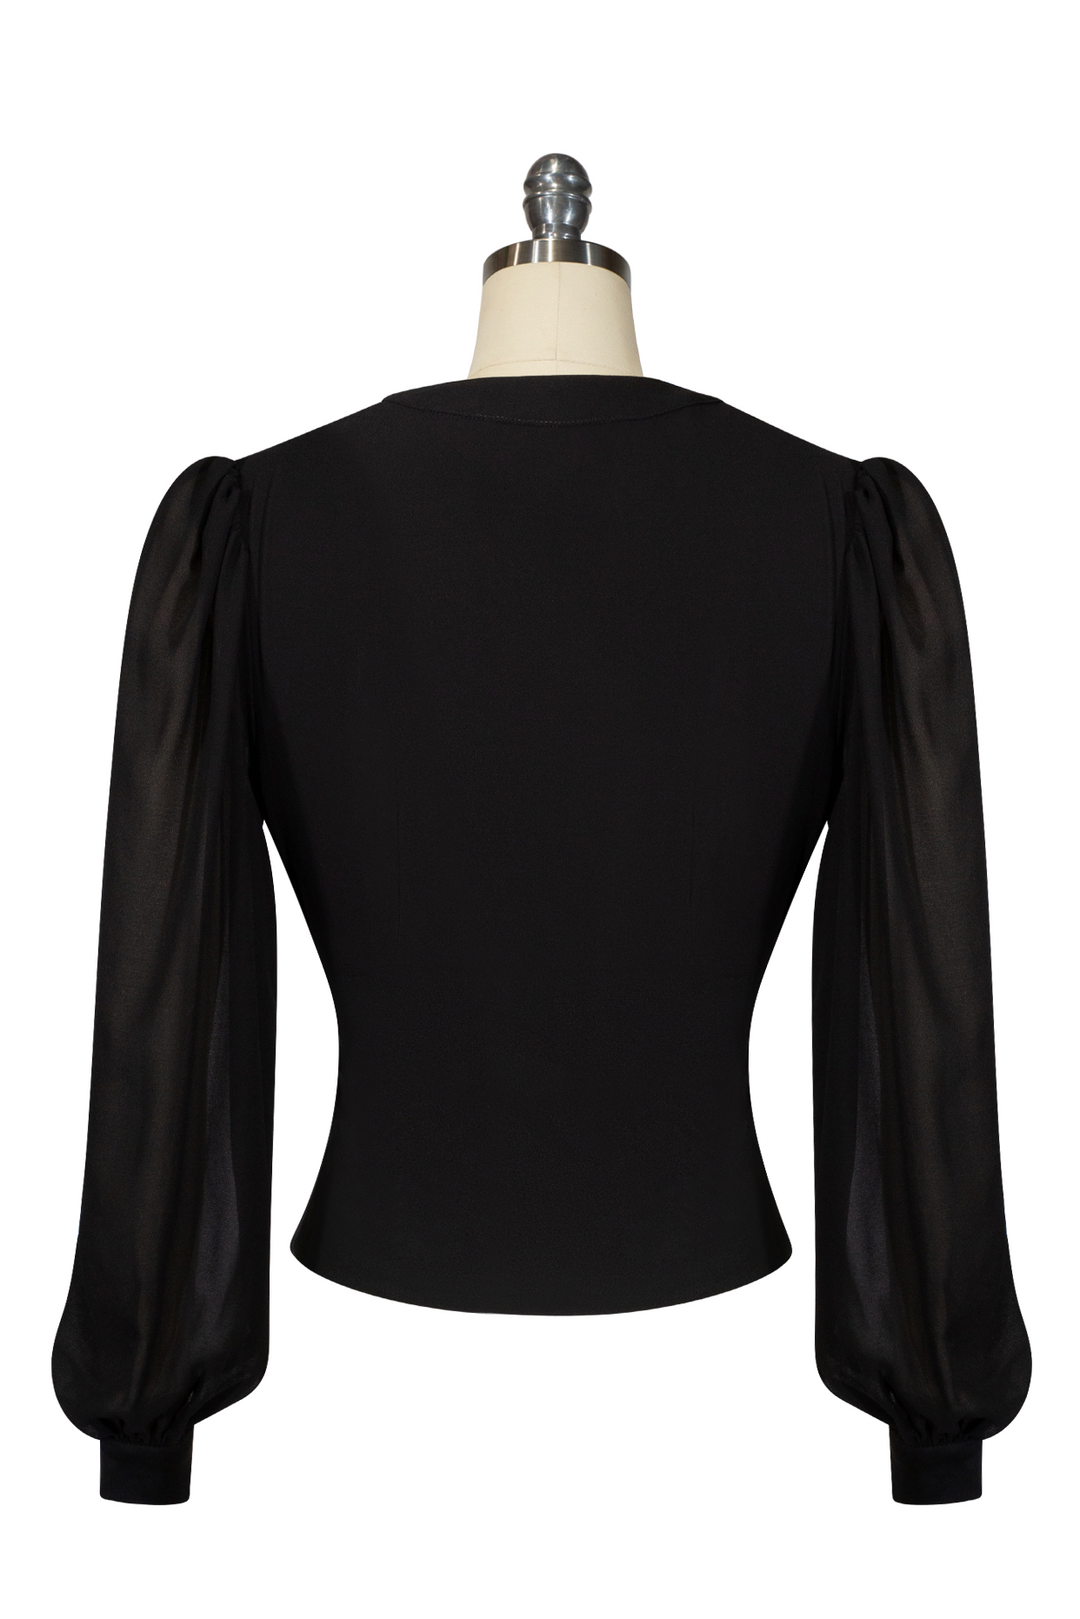 Capone Frill Front Blouse (Black) - Kitten D'Amour